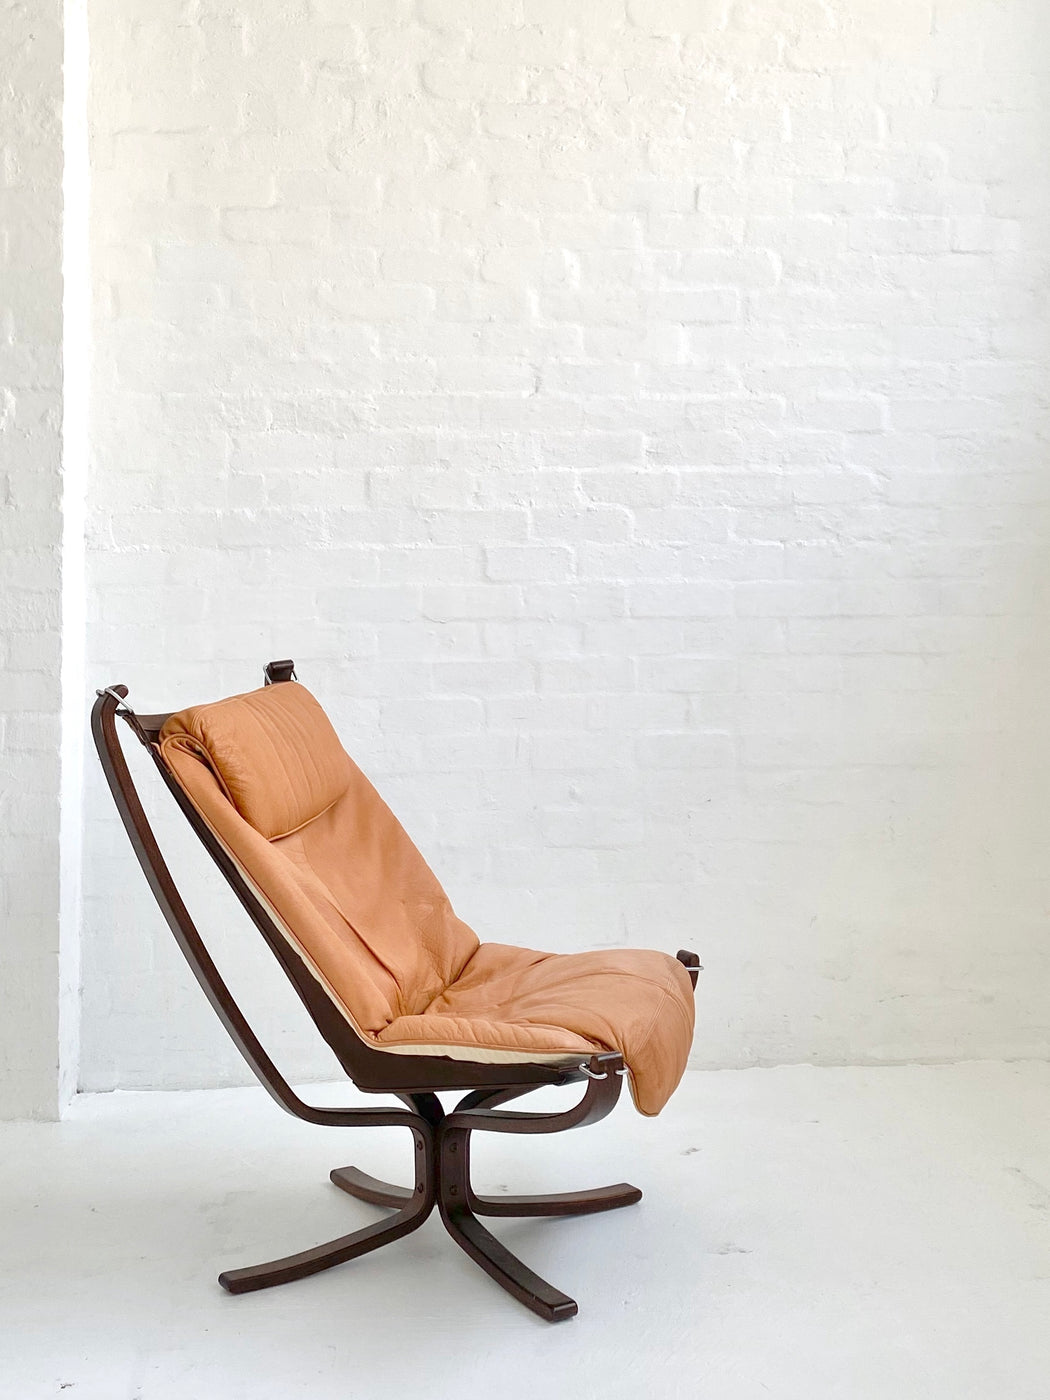 Sigurd Ressell 'Falcon' Chair